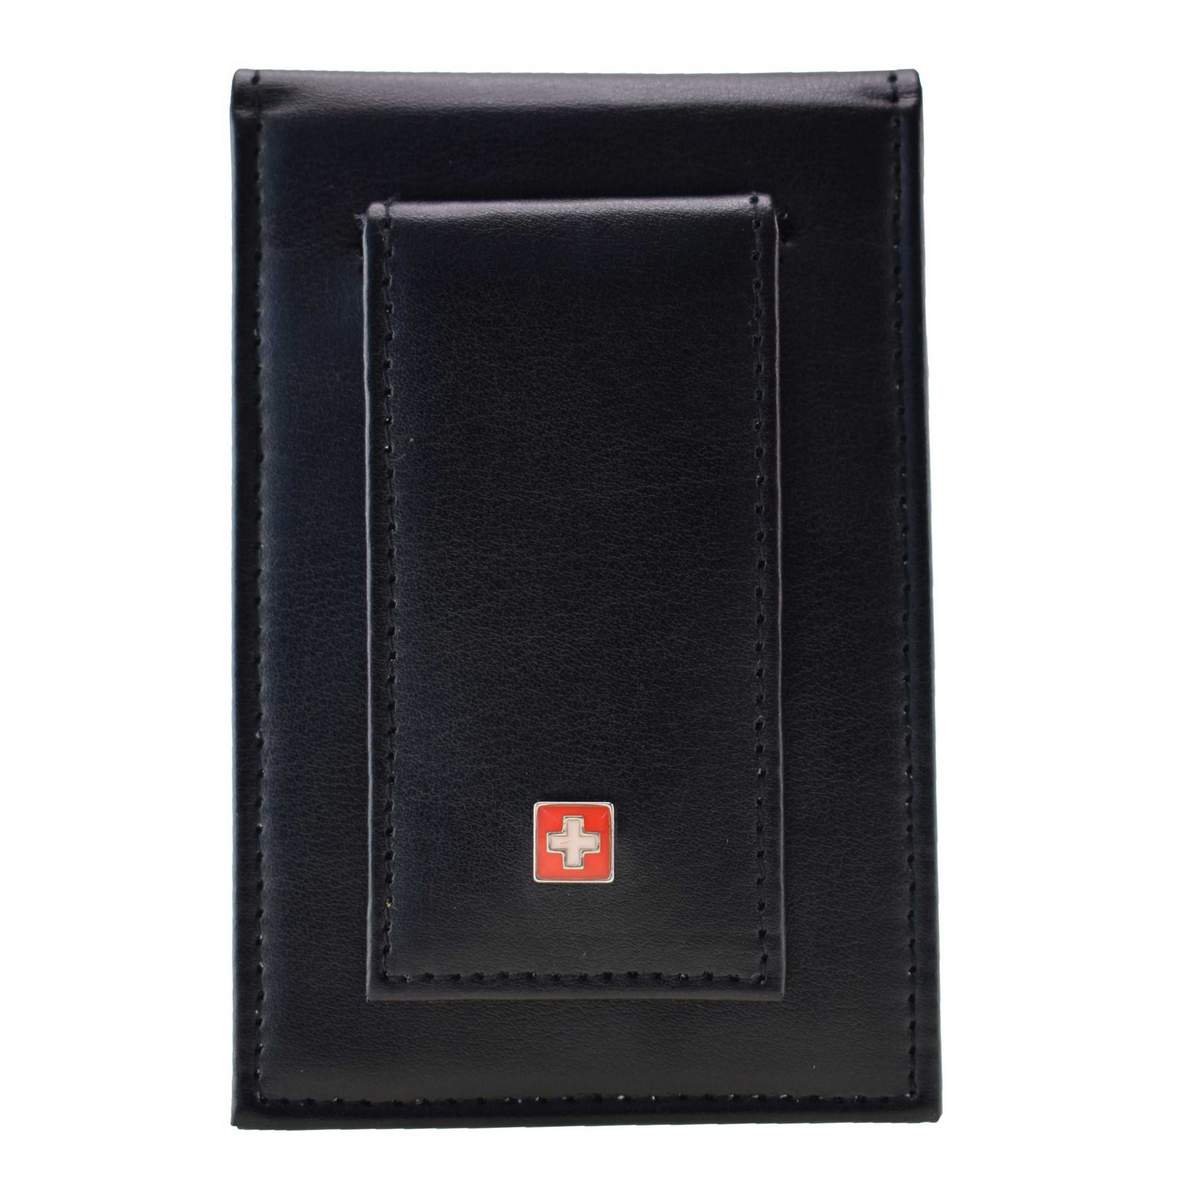 Shop Travel Wallet At Swiss-military